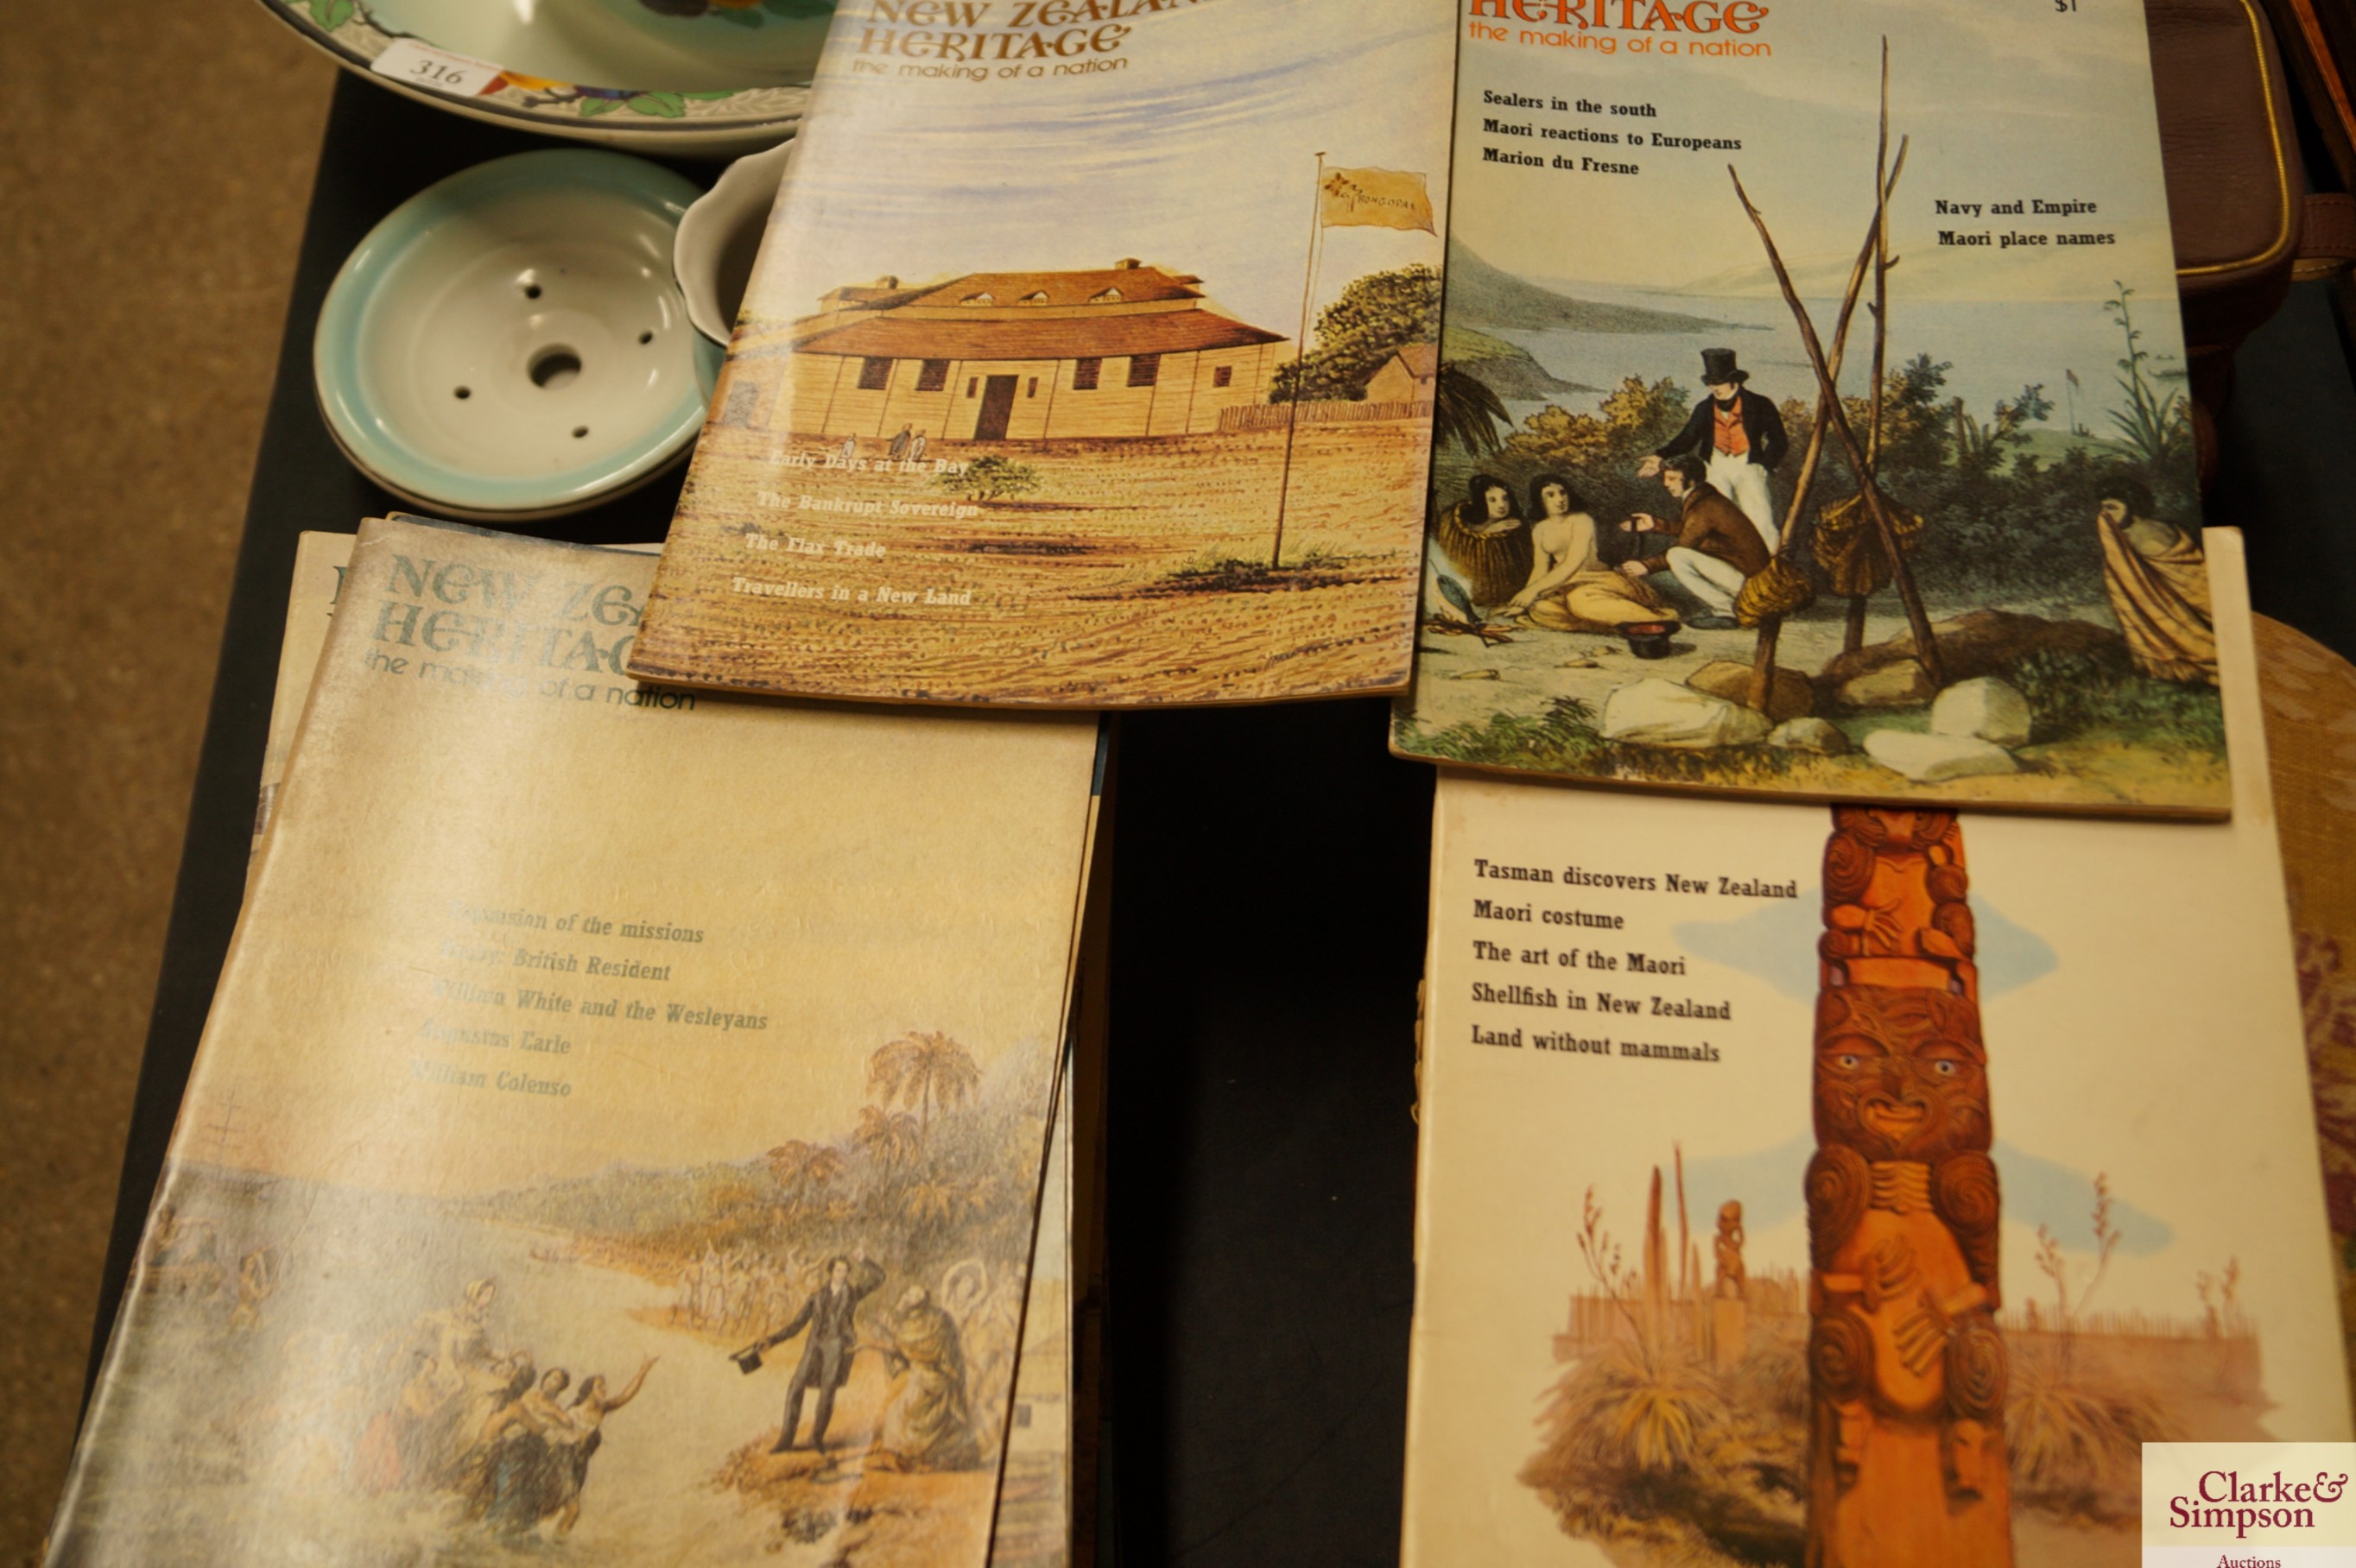 A collection of New Zealand Heritage magazines